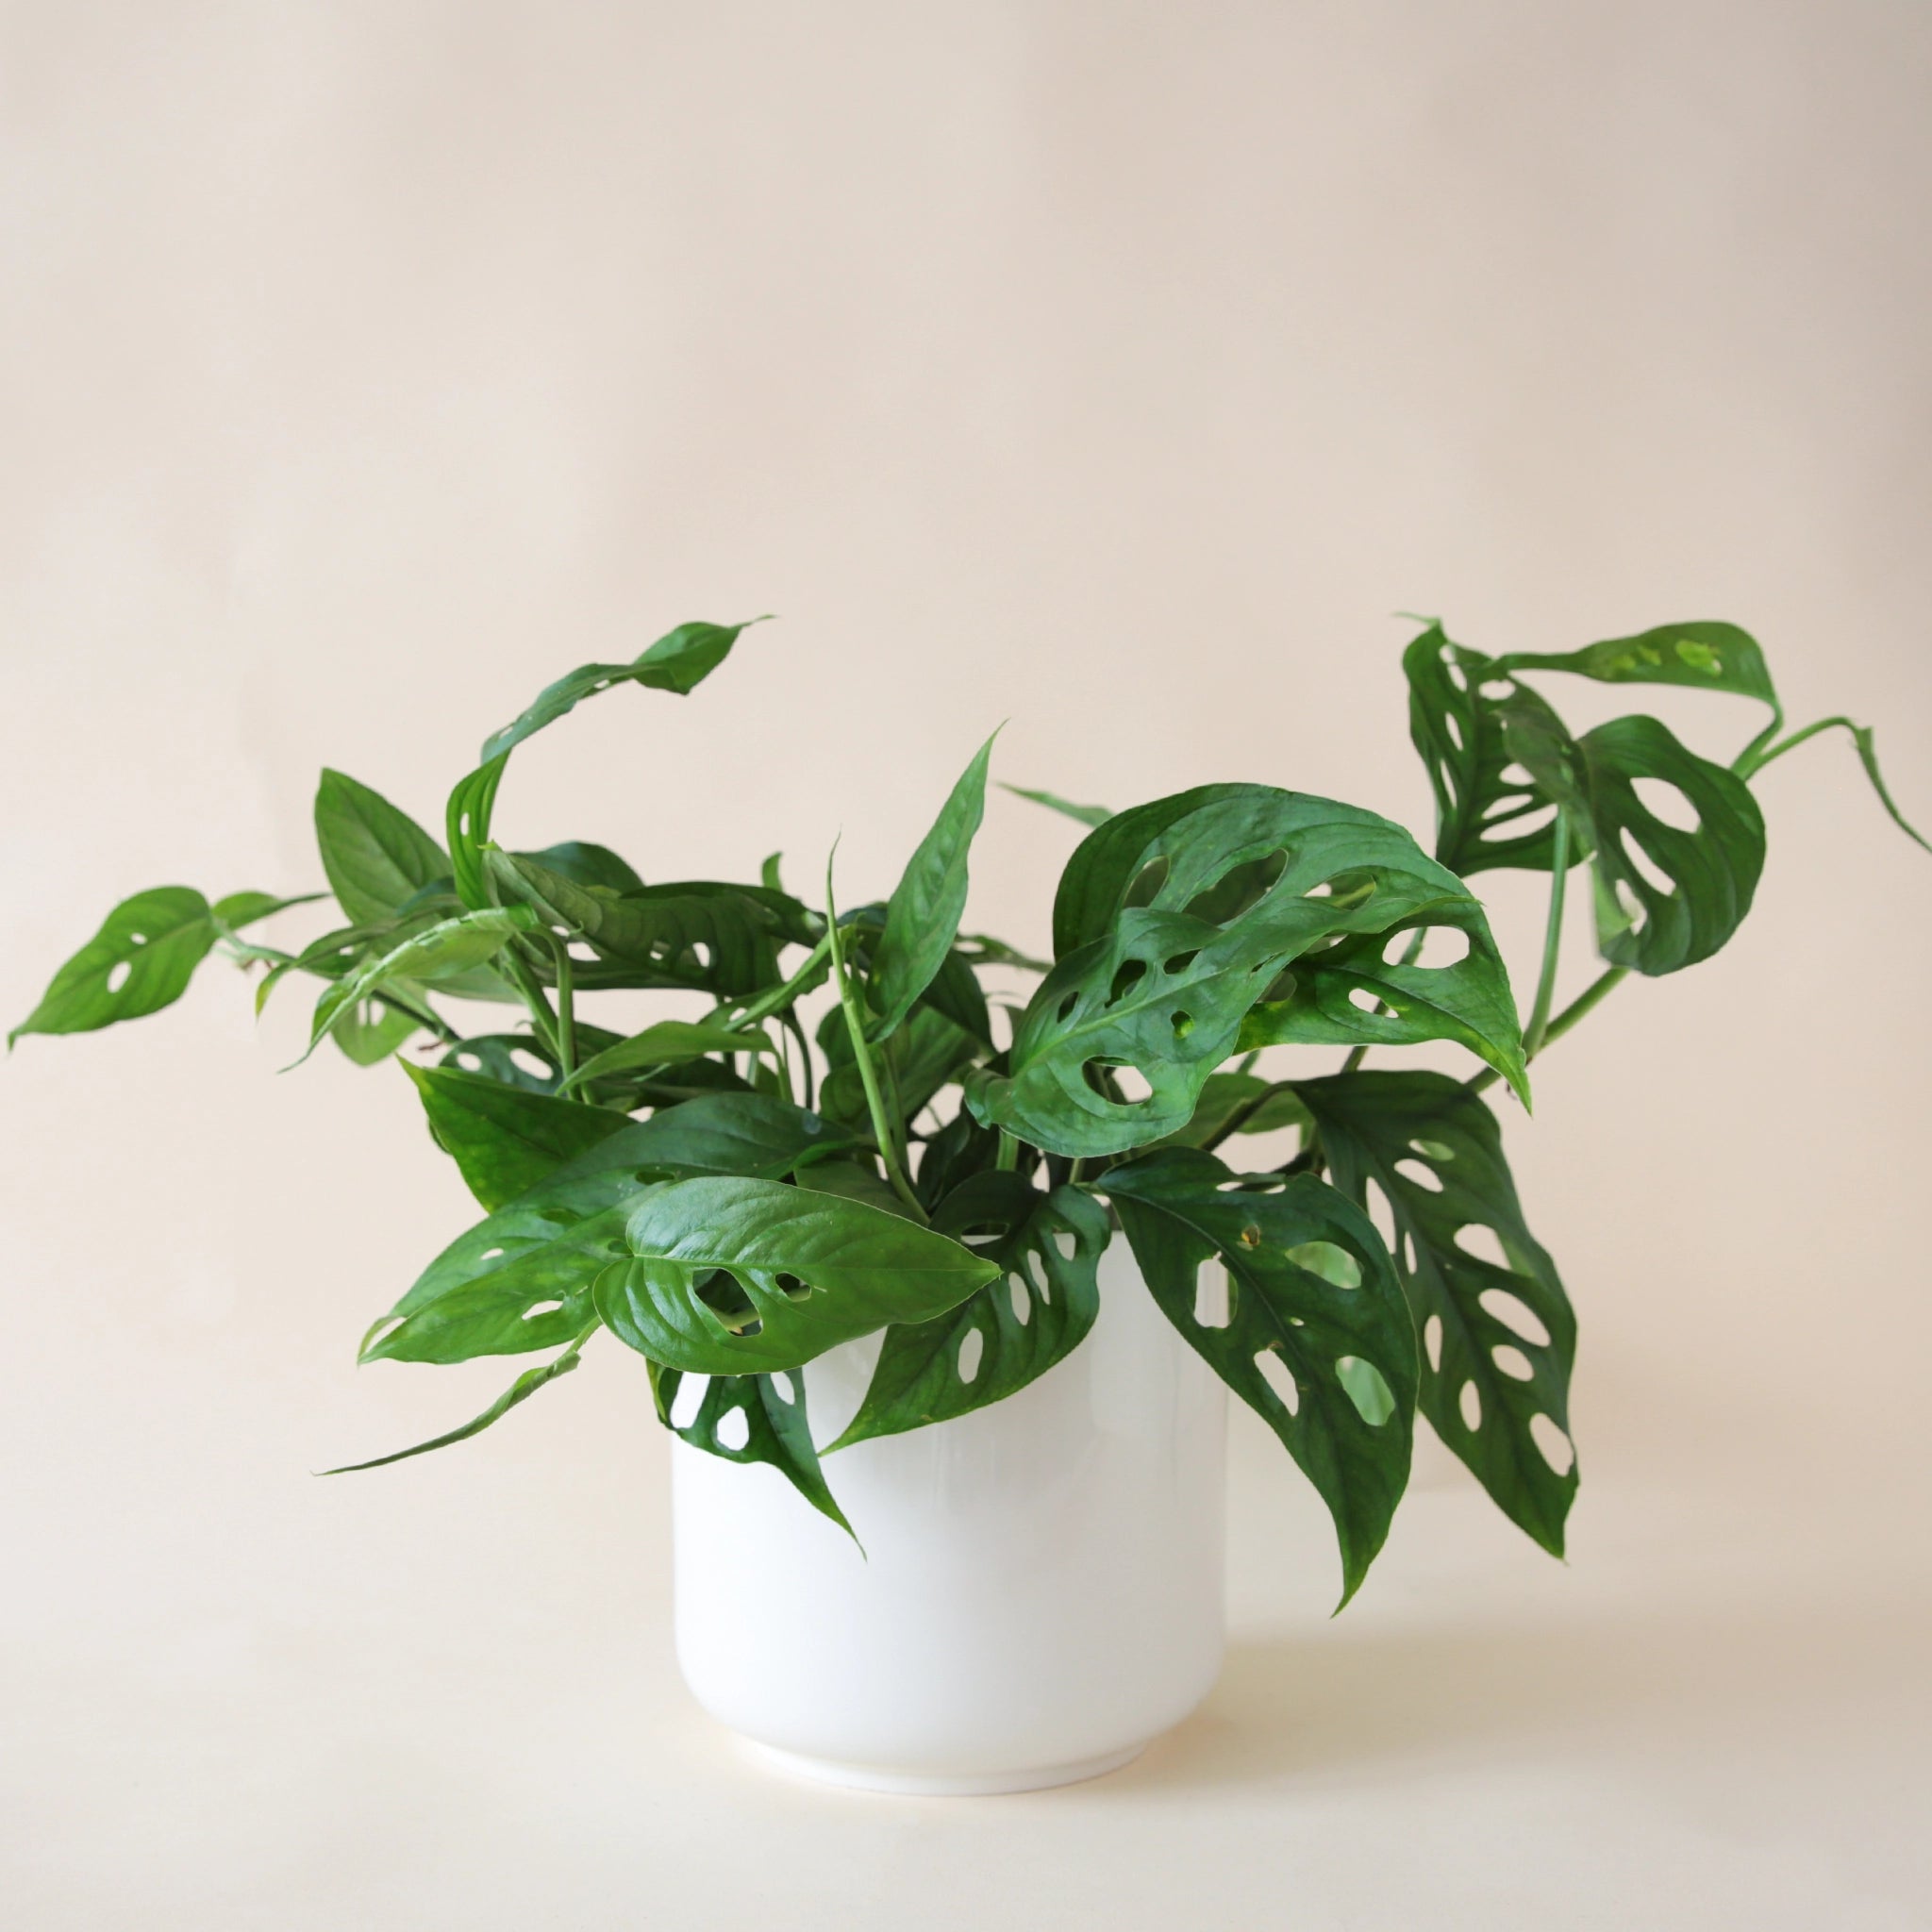 On a white background is a Monstera Adansonii Swiss cheese plant in a white ceramic planter